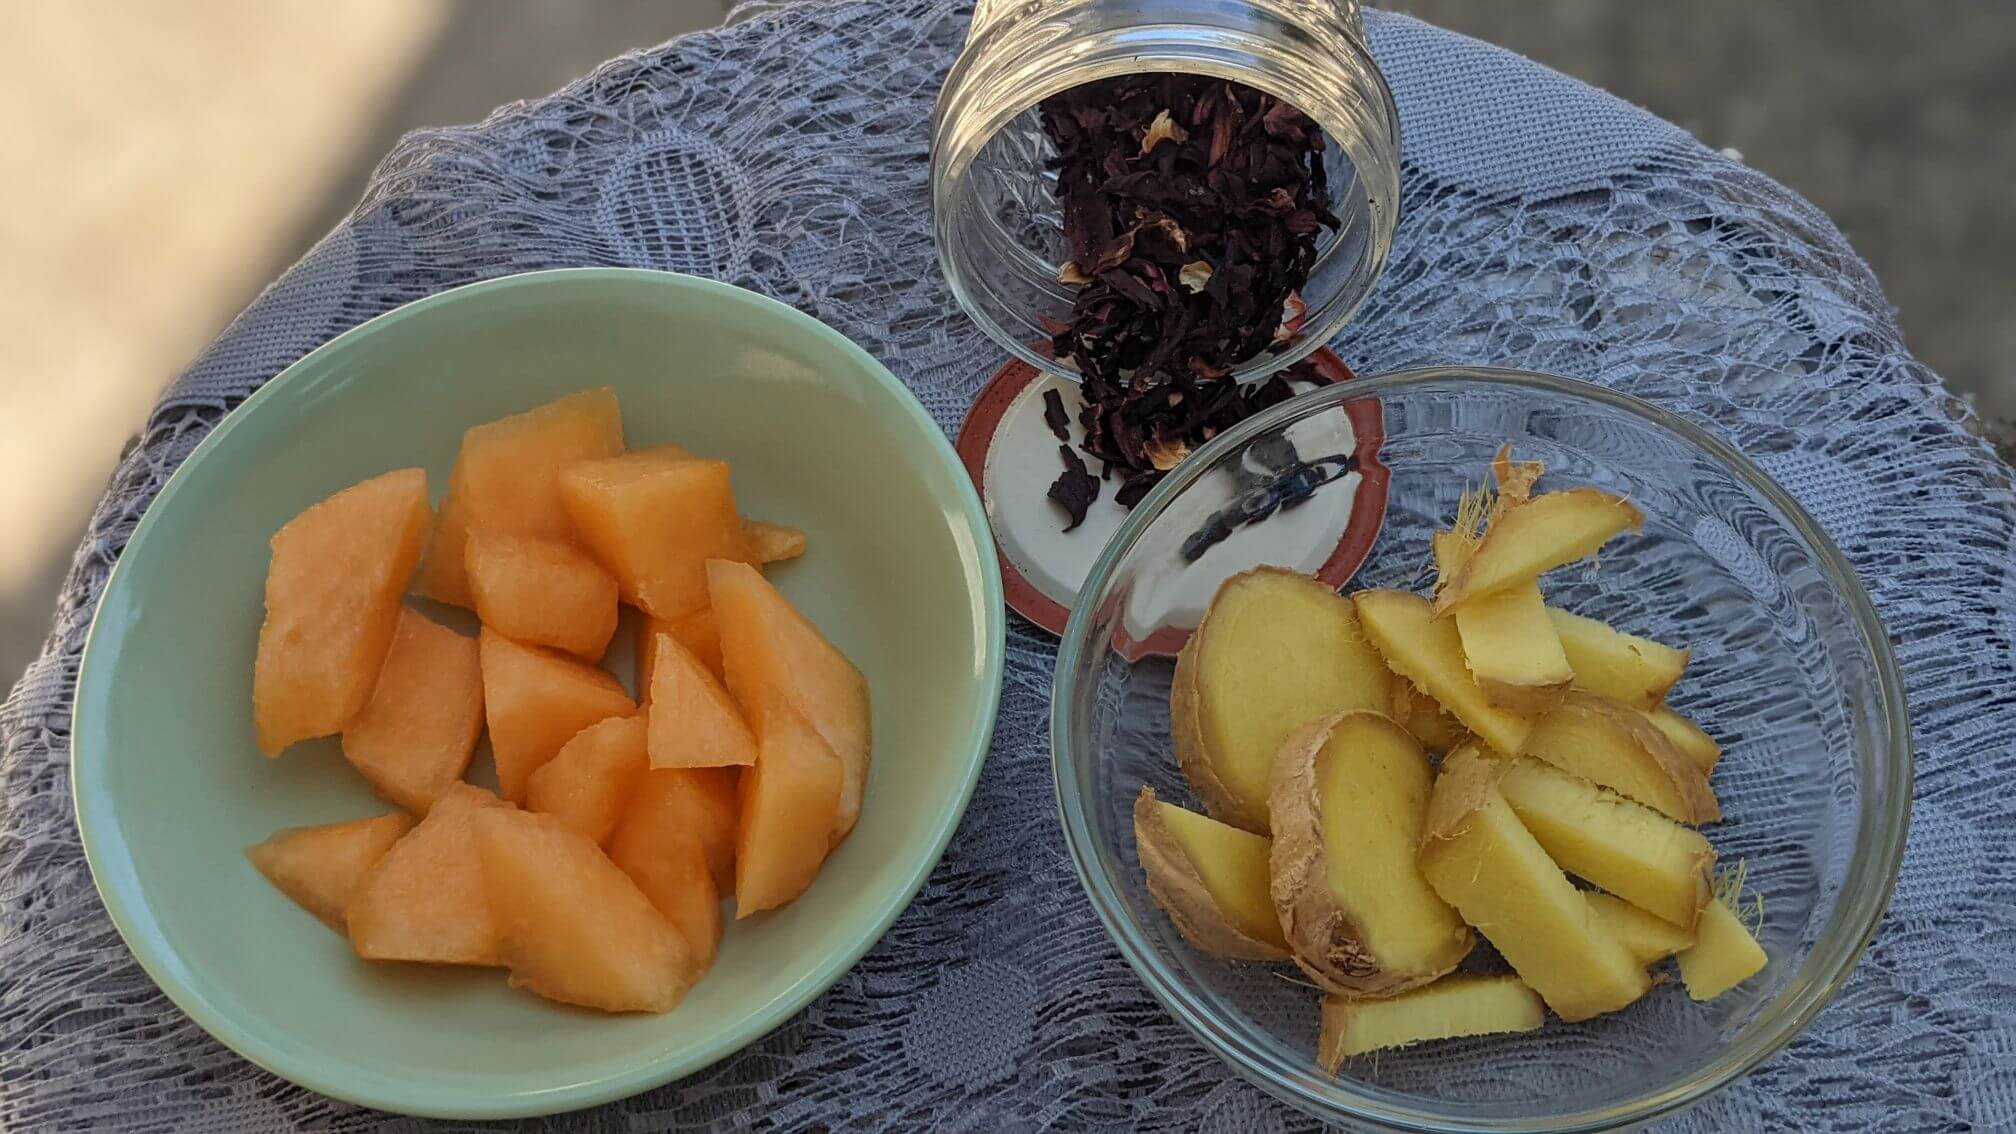 Fresh melon is in a shallow dish next to a scattering of dried hibiscus petals and sliced fresh ginger.